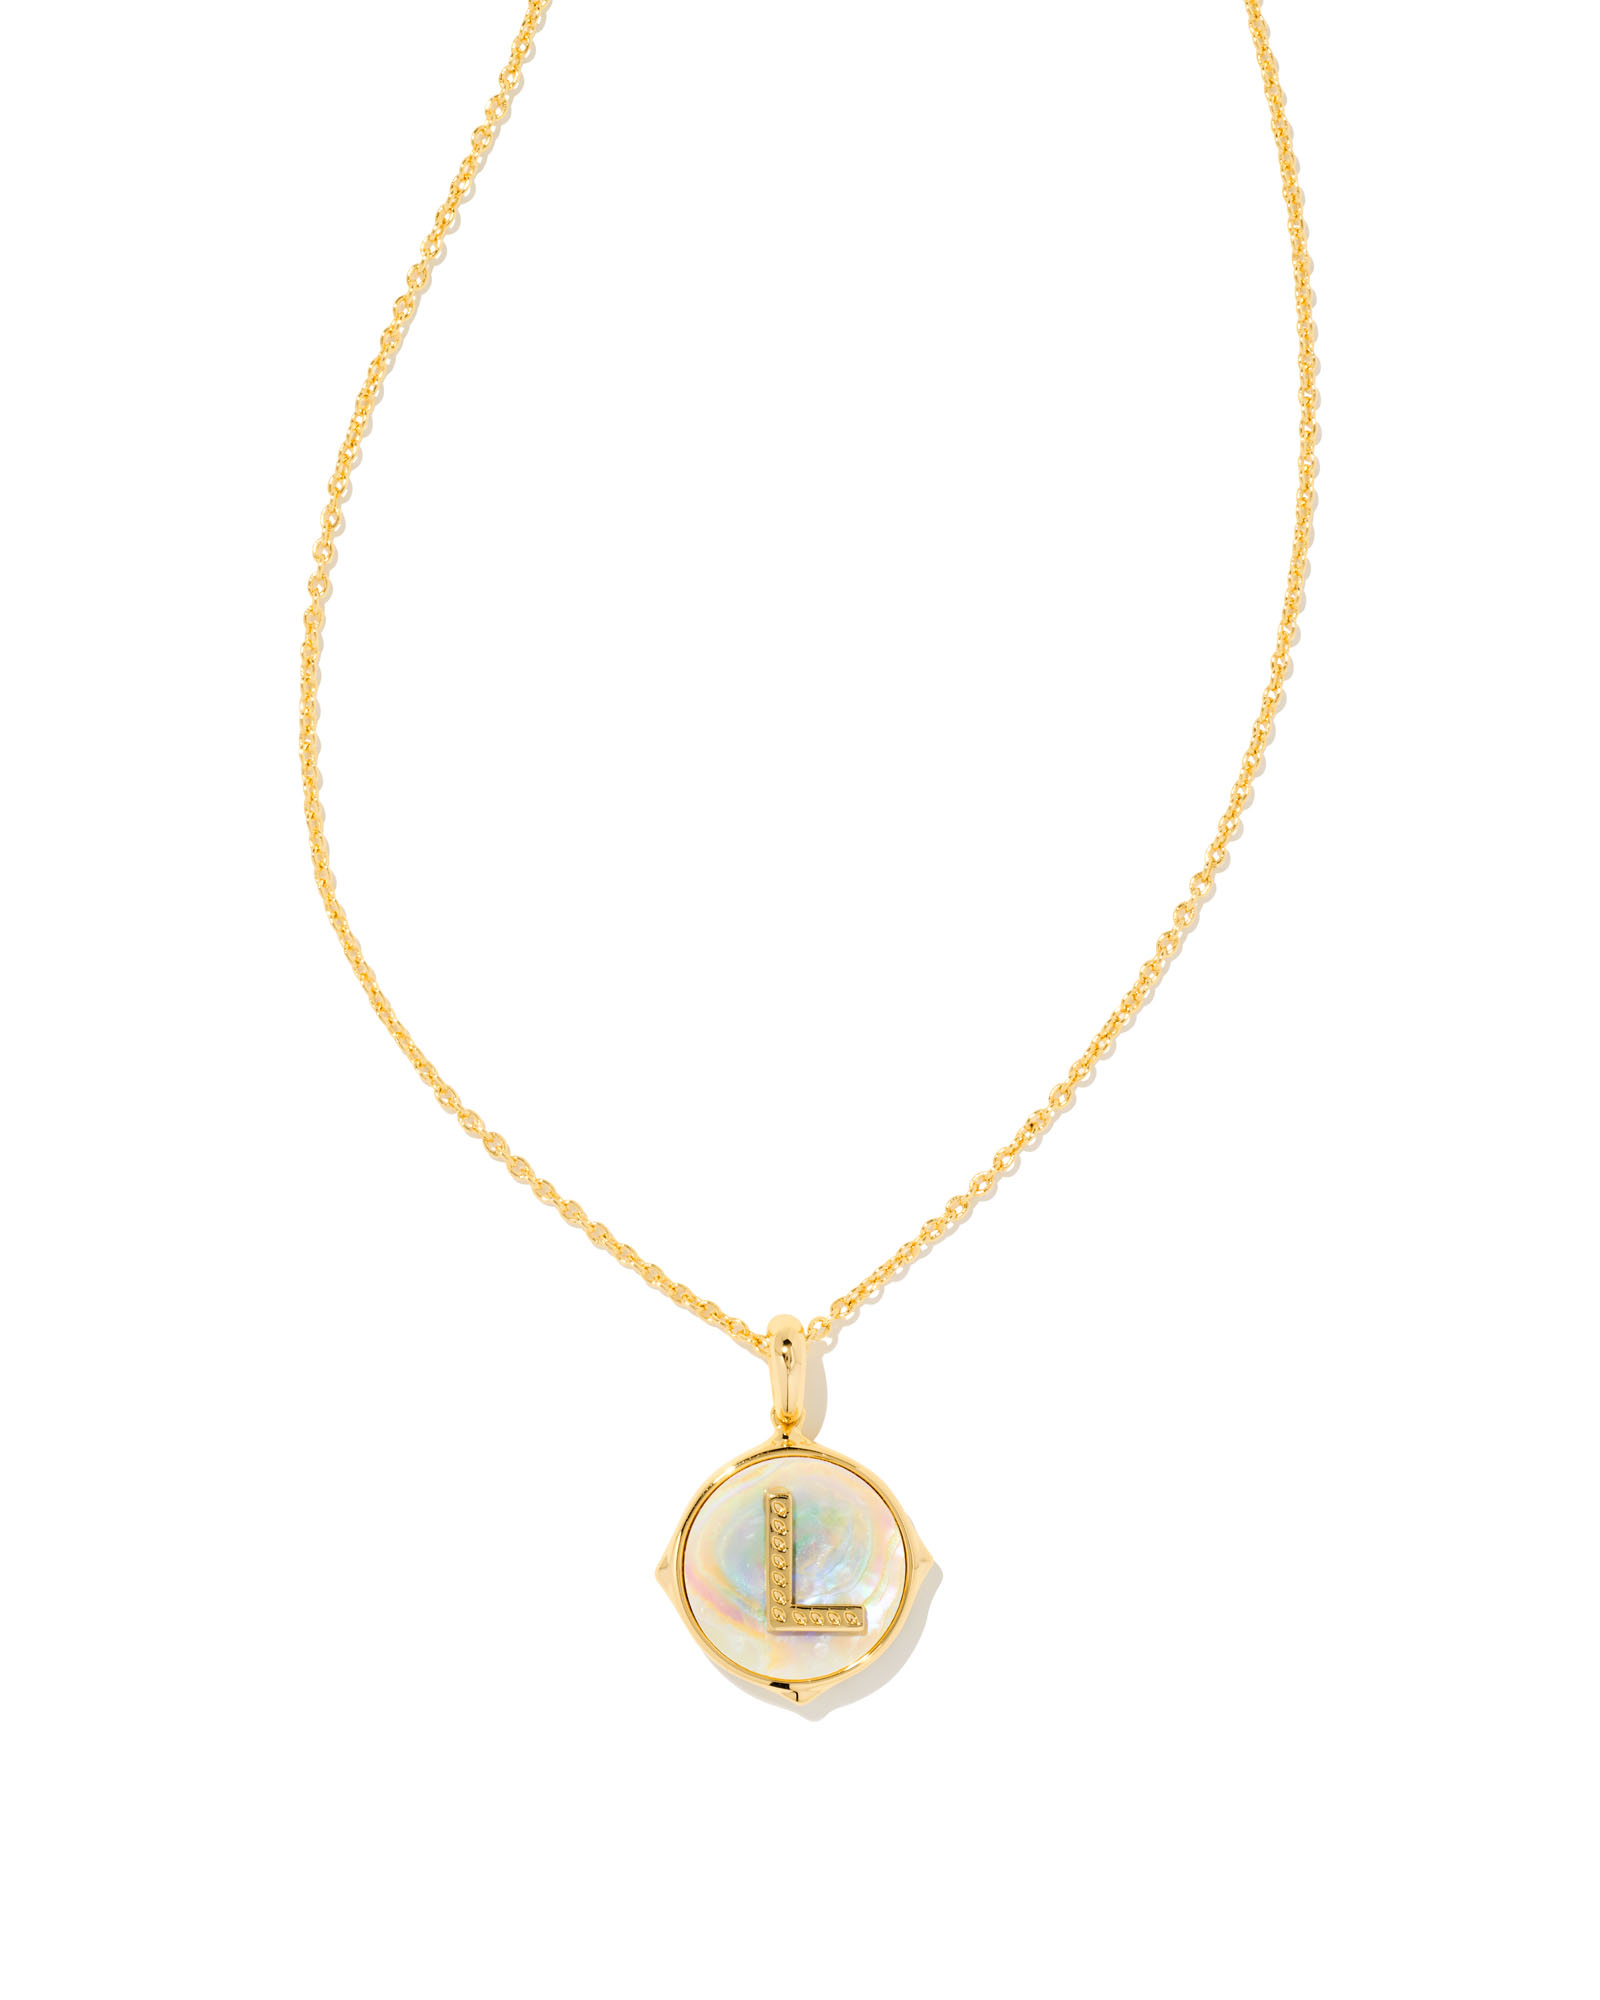 Initial L Necklace Adjustable 41-46cm/16-18' in 18k Gold Vermeil on  Sterling Silver | Jewellery by Monica Vinader